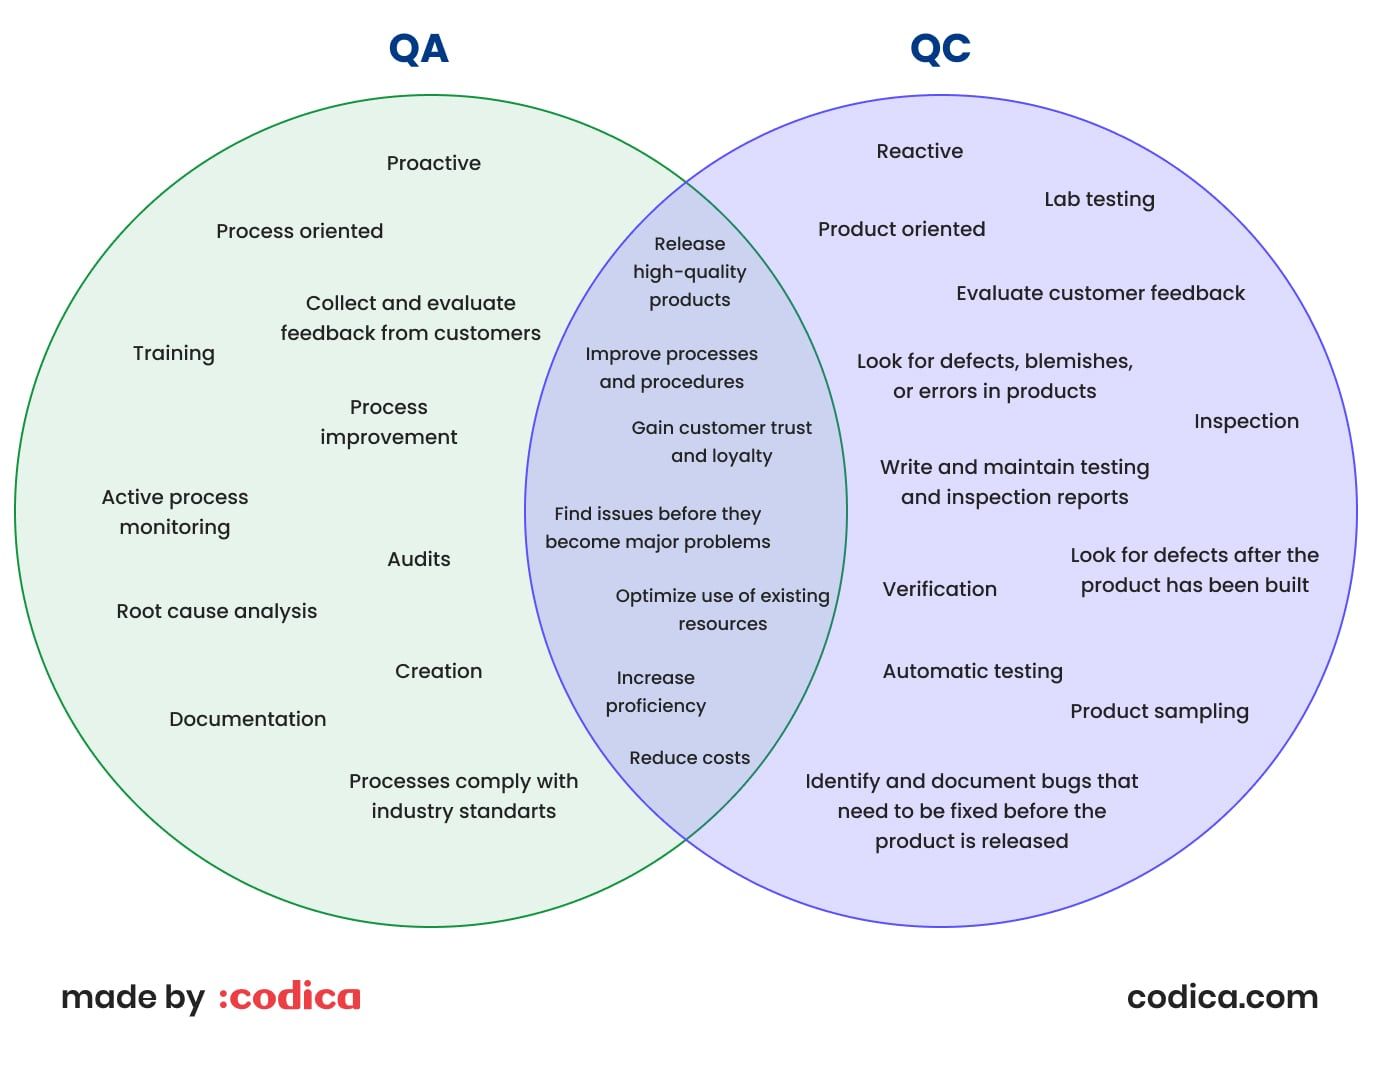 Differences between quality assurance and quality control